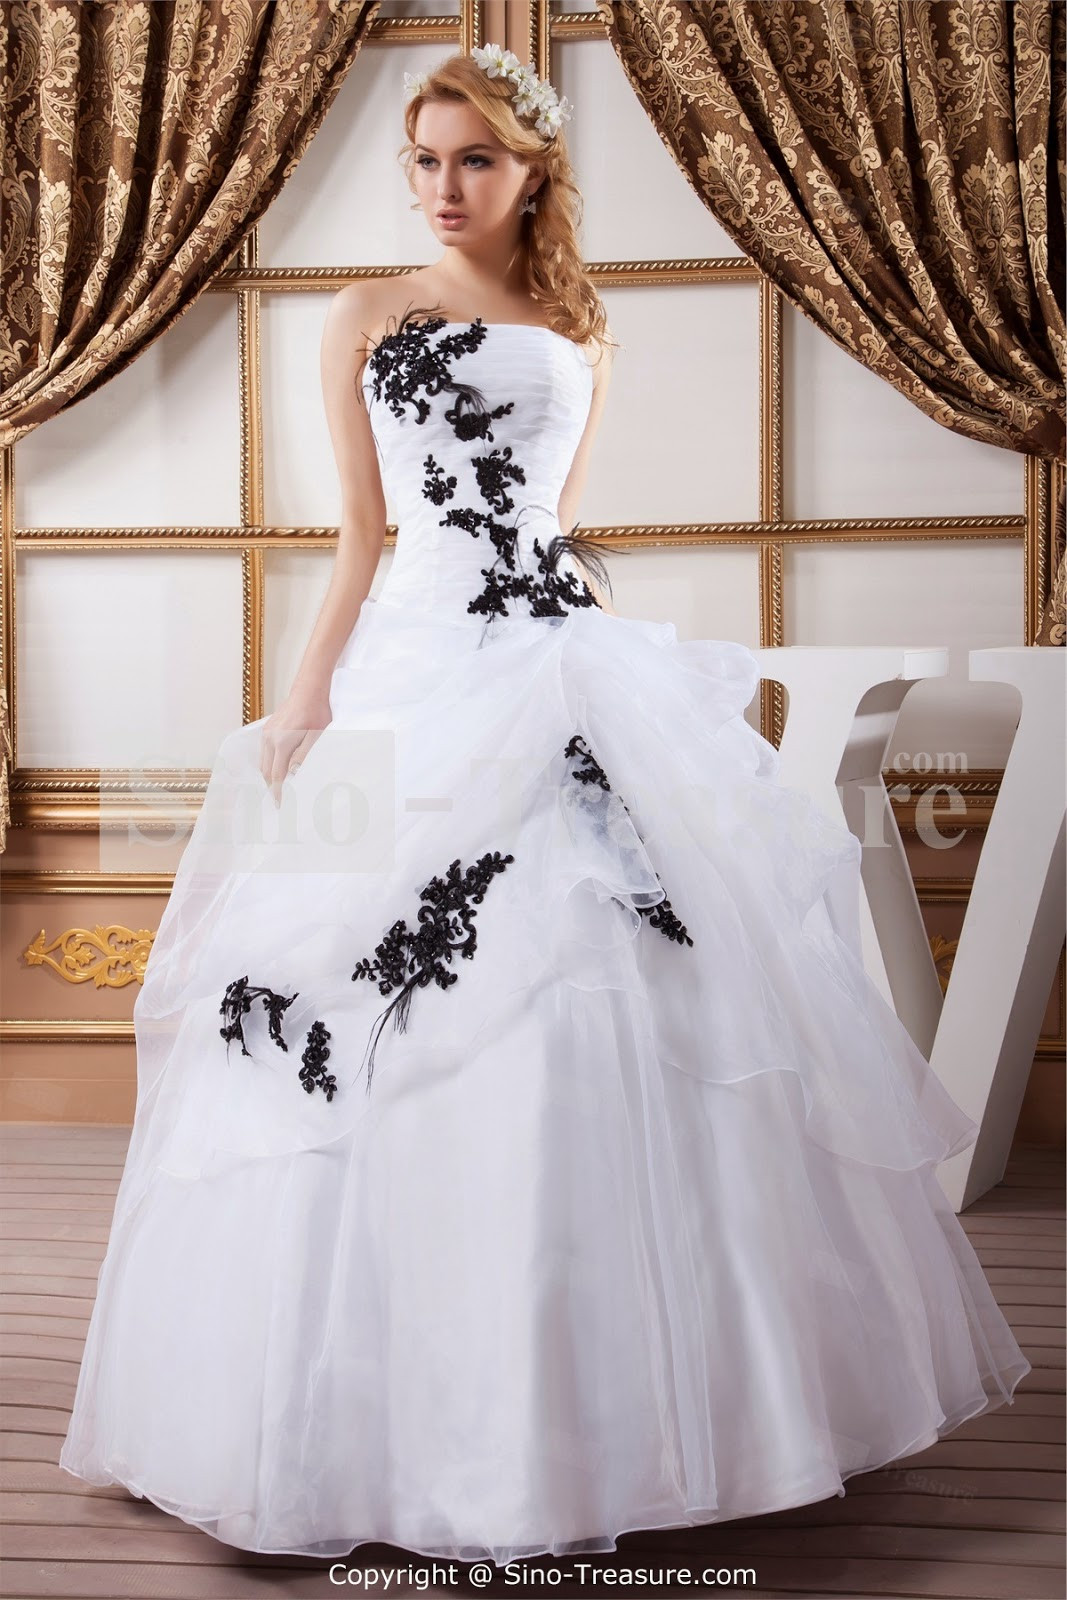 White Wedding Dress
 The History of the White Wedding Dress Wedding Dresses